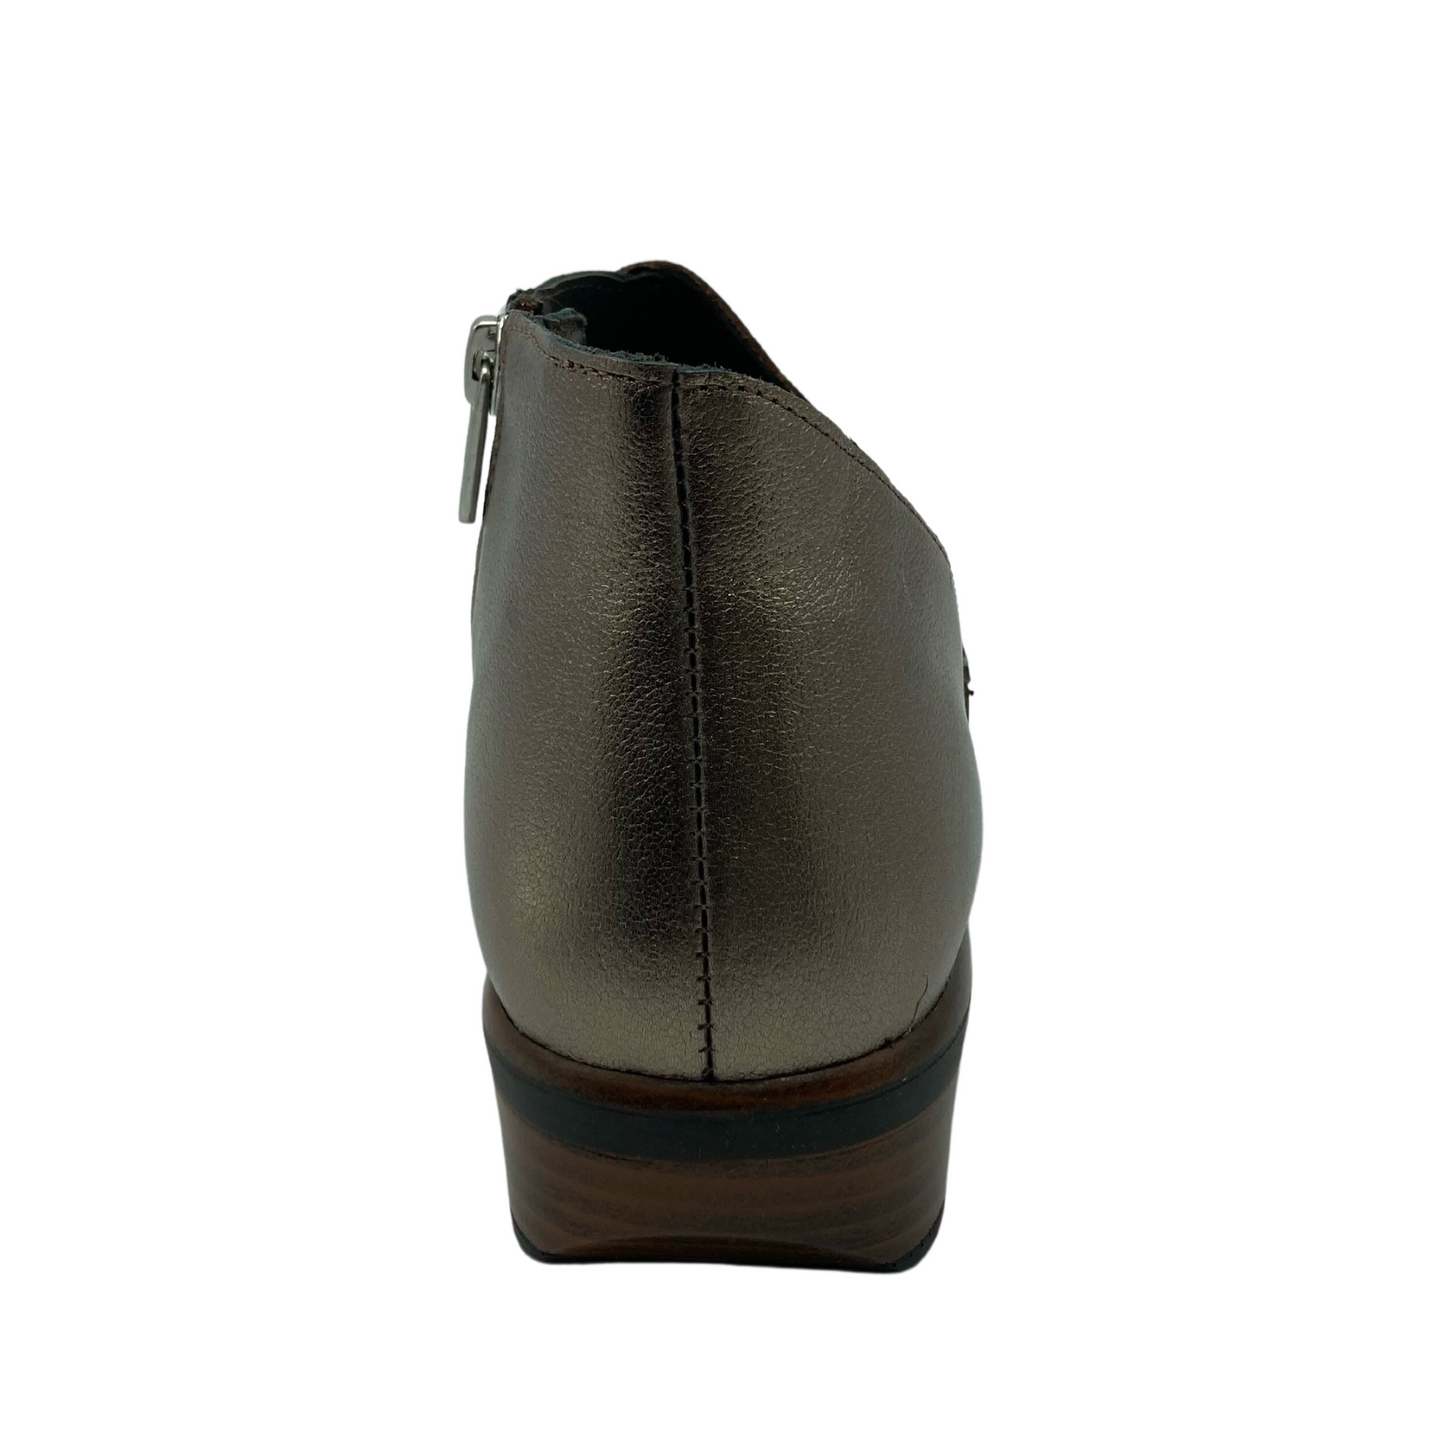 Back view of copper coloured leather ankle bootie with block heel and silver side zipper